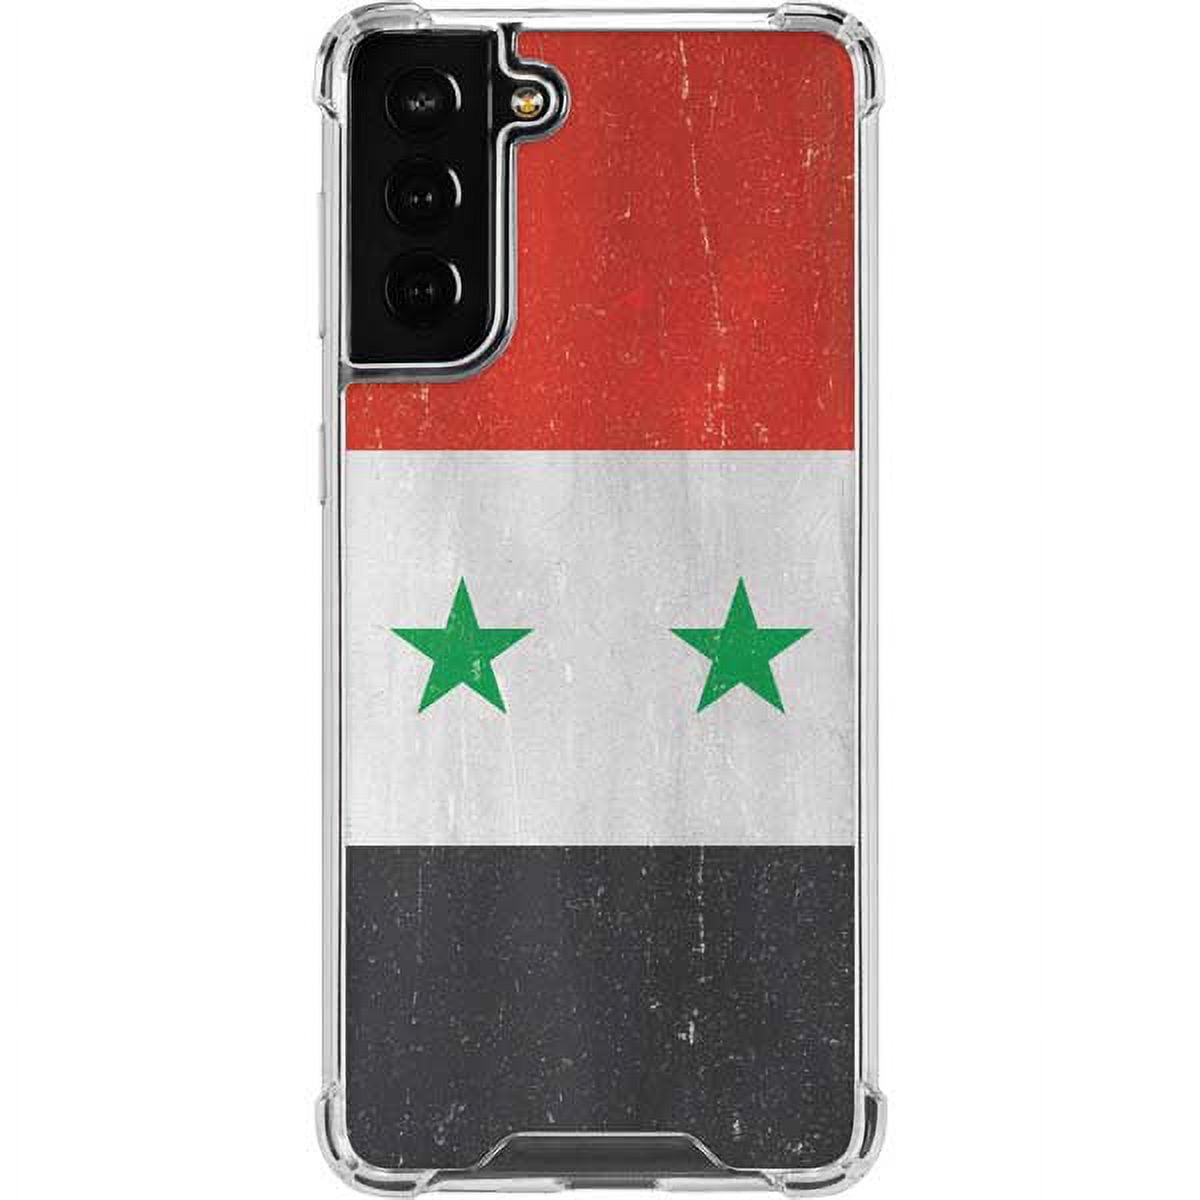 of　Clear　Case　Skinit　the　Syria　Countries　S22　World　Galaxy　Distressed　Flag　Plus